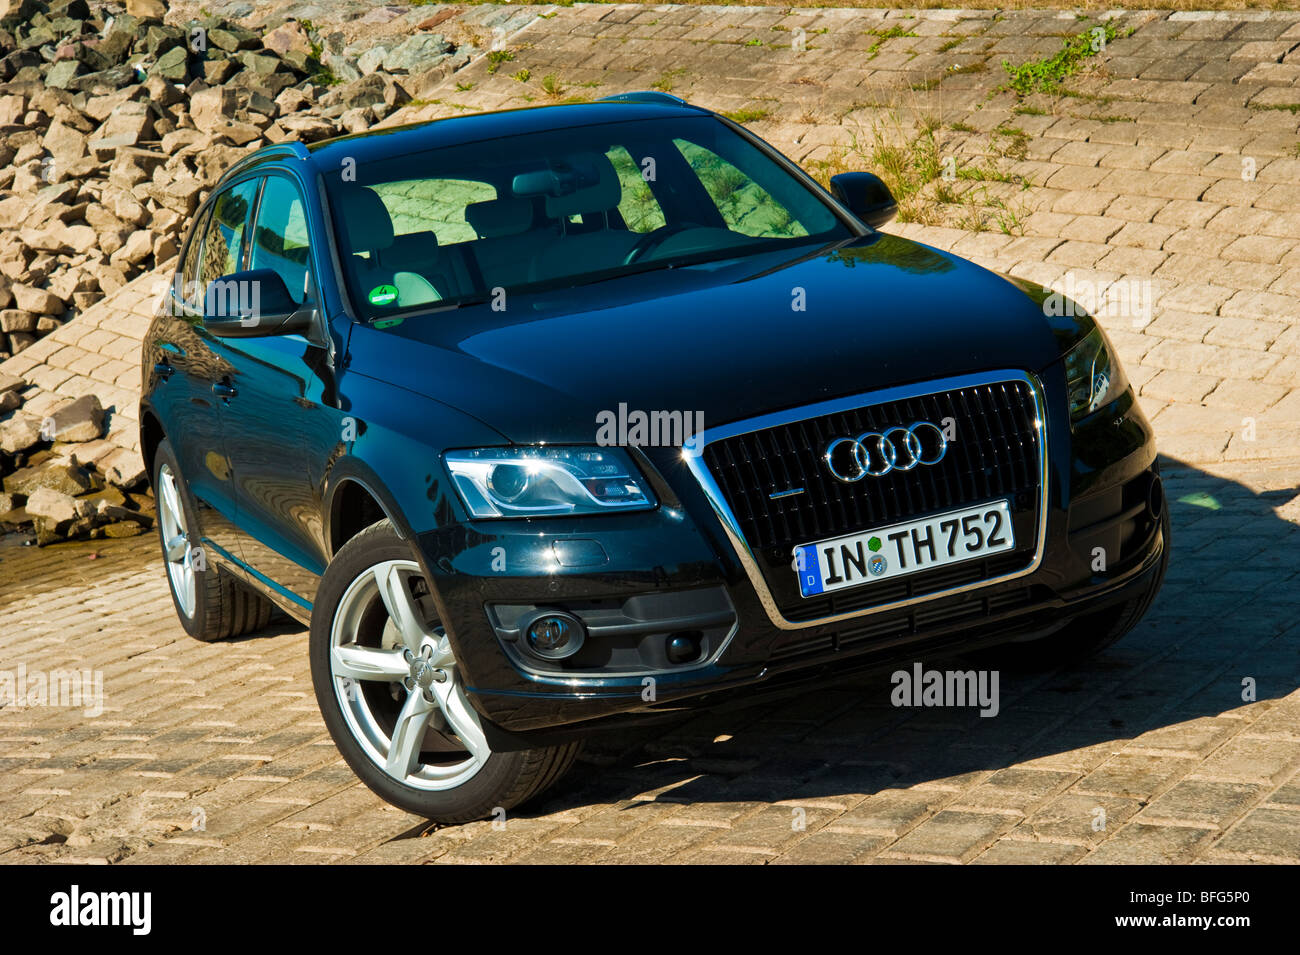 Audi Q5 in black front 3/4 view Stock Photo